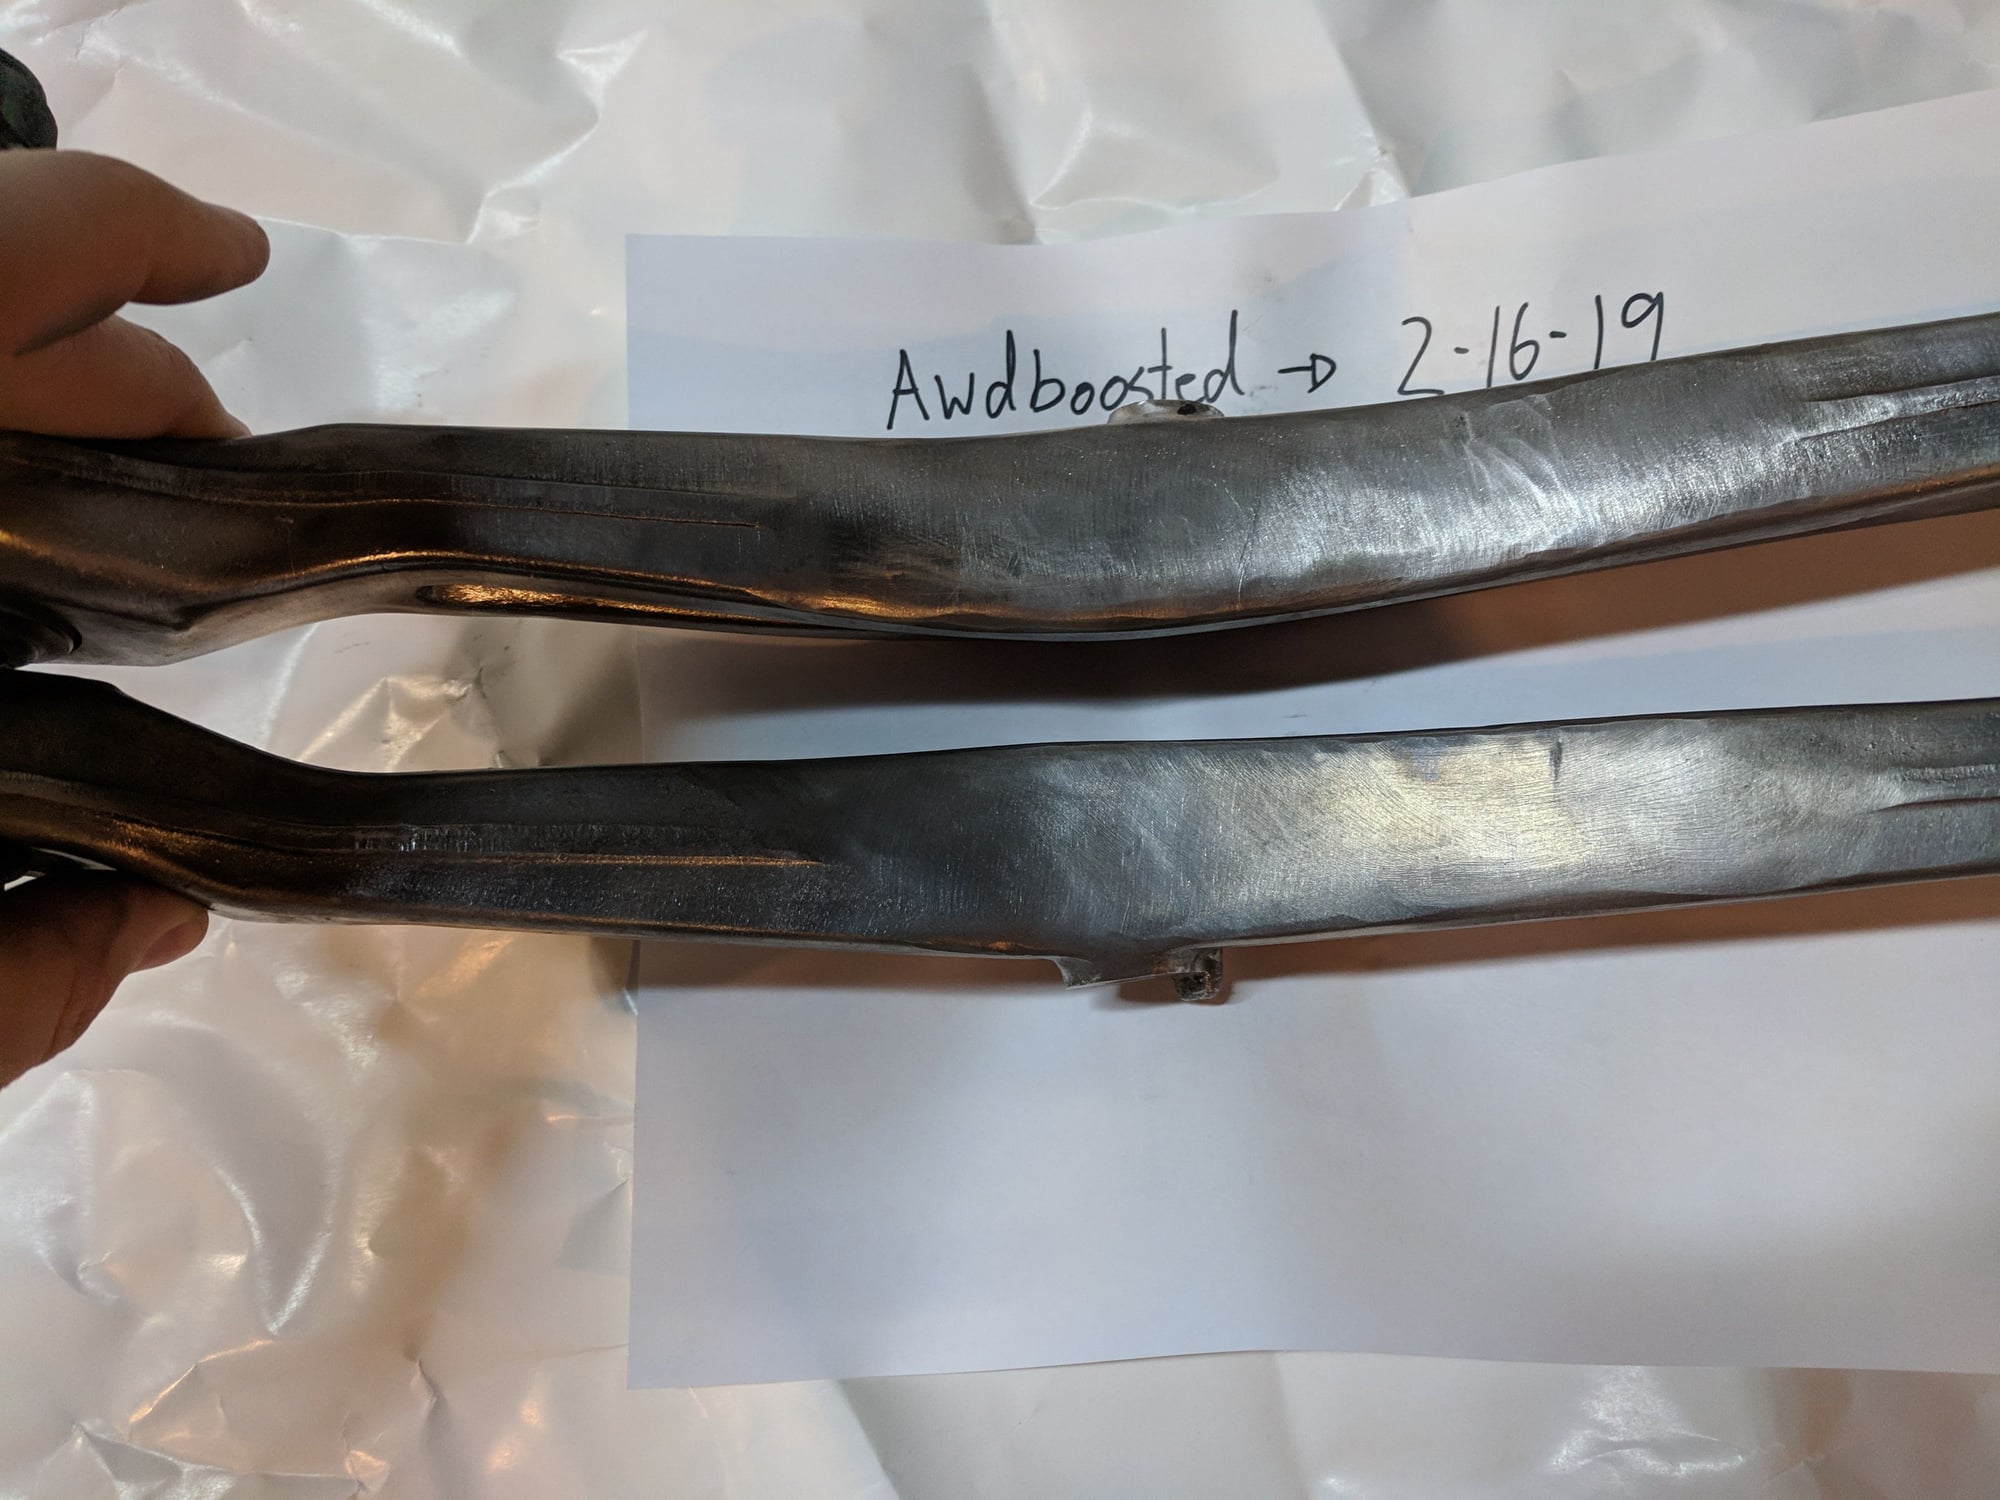 Steering/Suspension - Evo 8/9 rear trailing arms - Used - 2003 to 2006 Mitsubishi Lancer Evolution - Chicago, IL 60089, United States